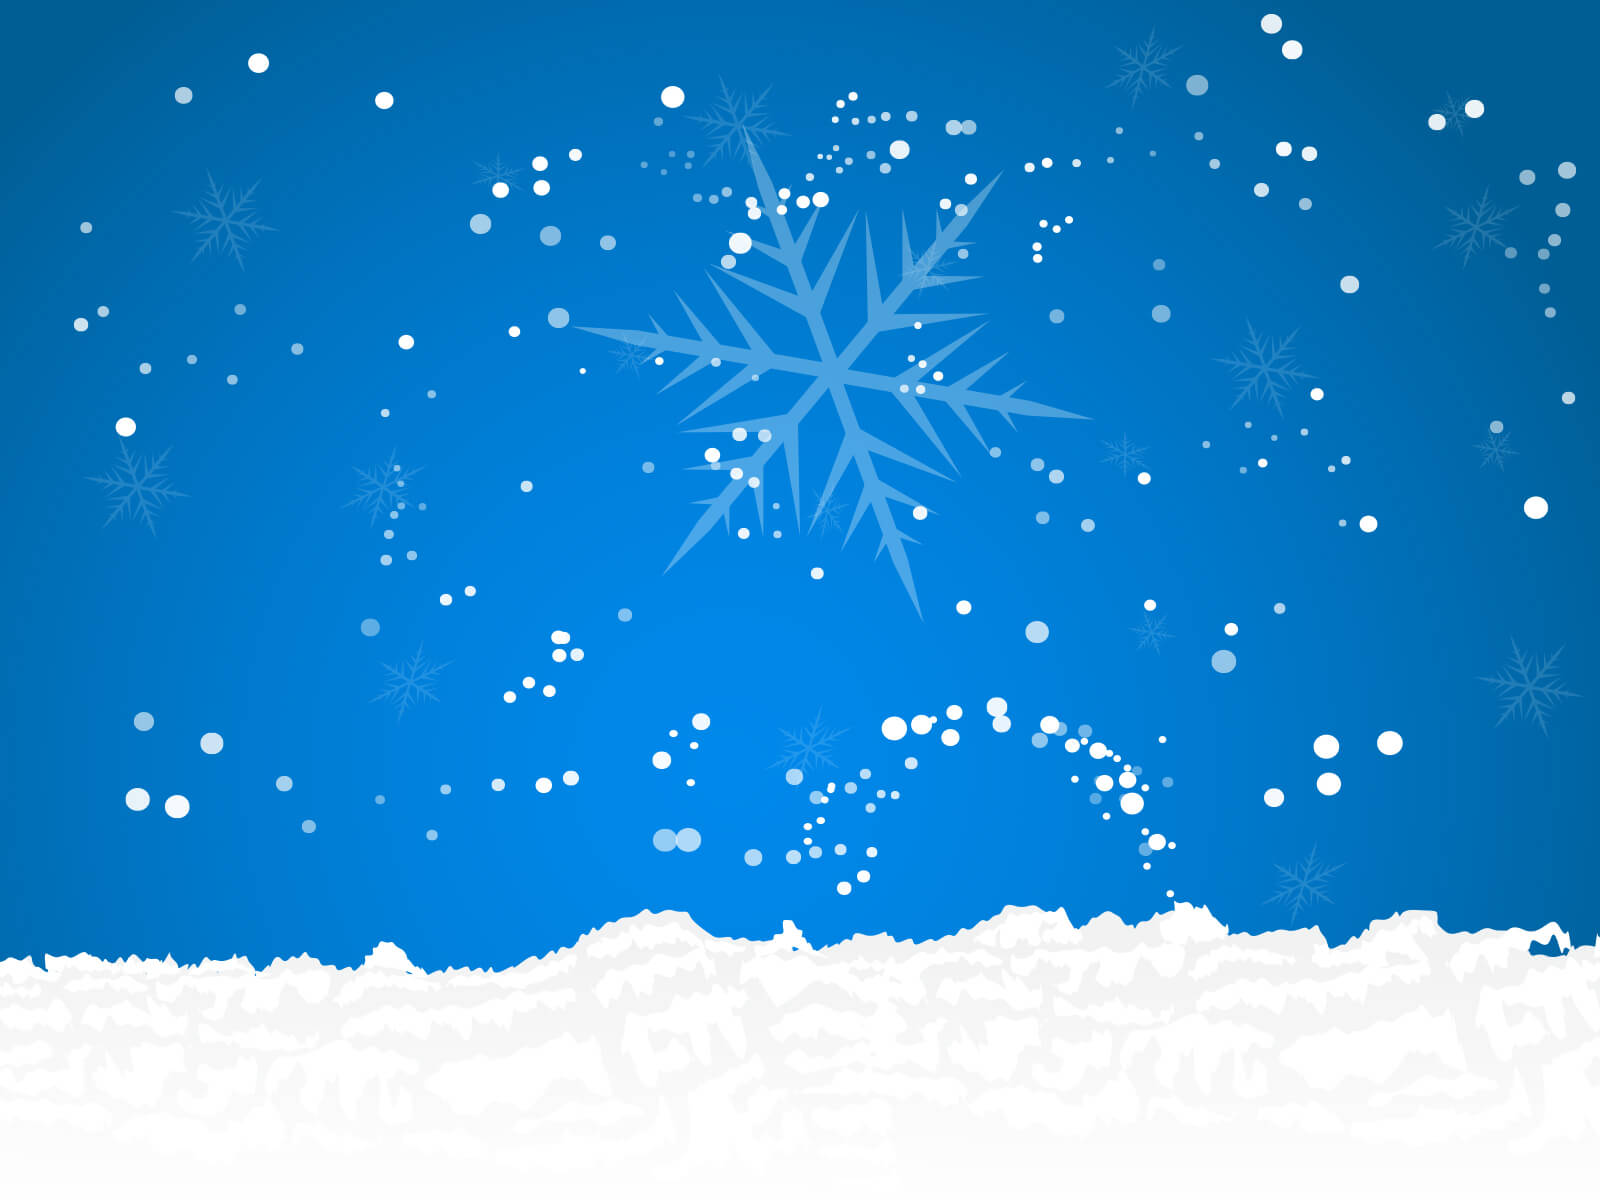 Snow Powerpoint - Free Ppt Backgrounds And Templates Throughout Snow Powerpoint Template